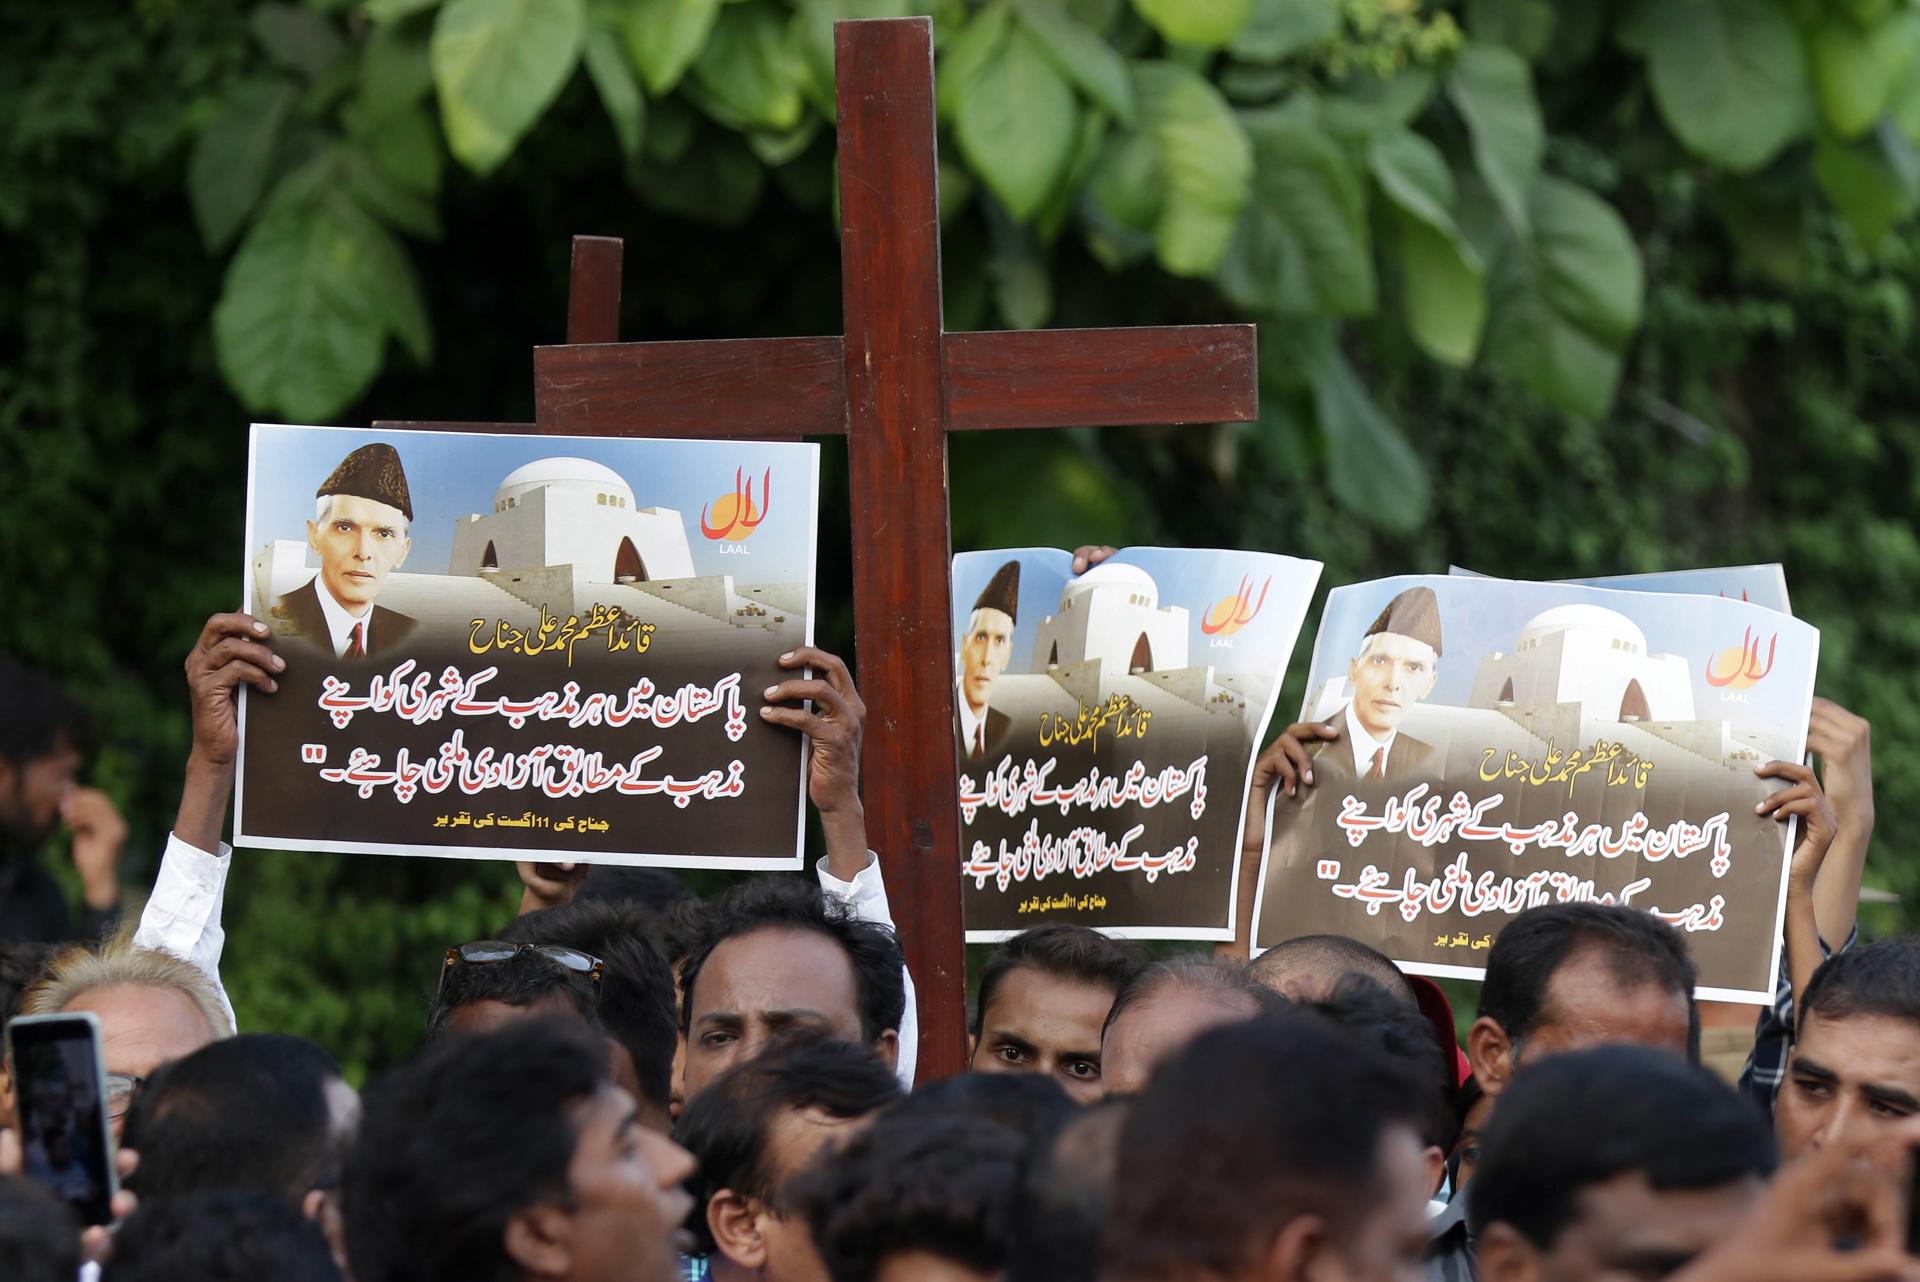 Members of the Christian minority hols placards showing picture of founder of Pakistan, Muhammad Ali Jinnah quoting him in Urdu 'Pakistani citizen of any religion should have freedom to practice their own religion' as they shout slogans during a protest against mob attacks that erupted the day before in Jaranwala, near Faisalabad, in Peshawar, Pakistan, 17 August 2023. EFE-EPA/RAHAT DAR